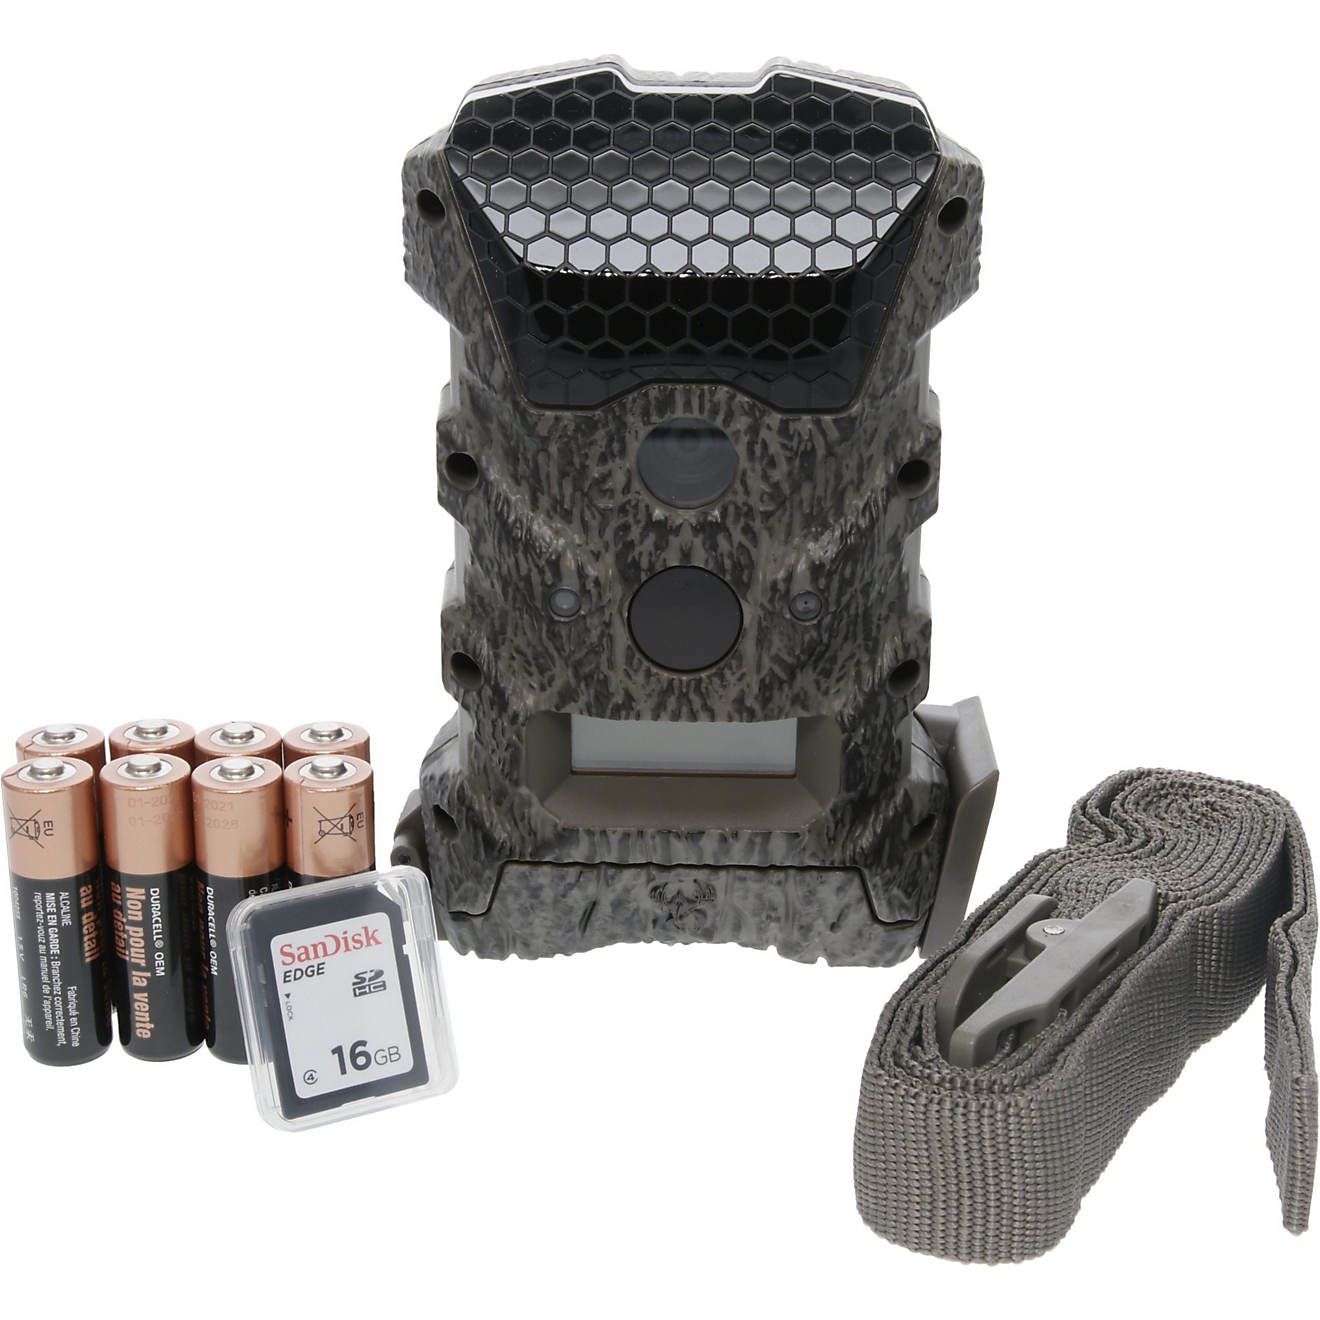 Wildgame Innovations Mirage Pro Lights Out 32 MP Game Camera